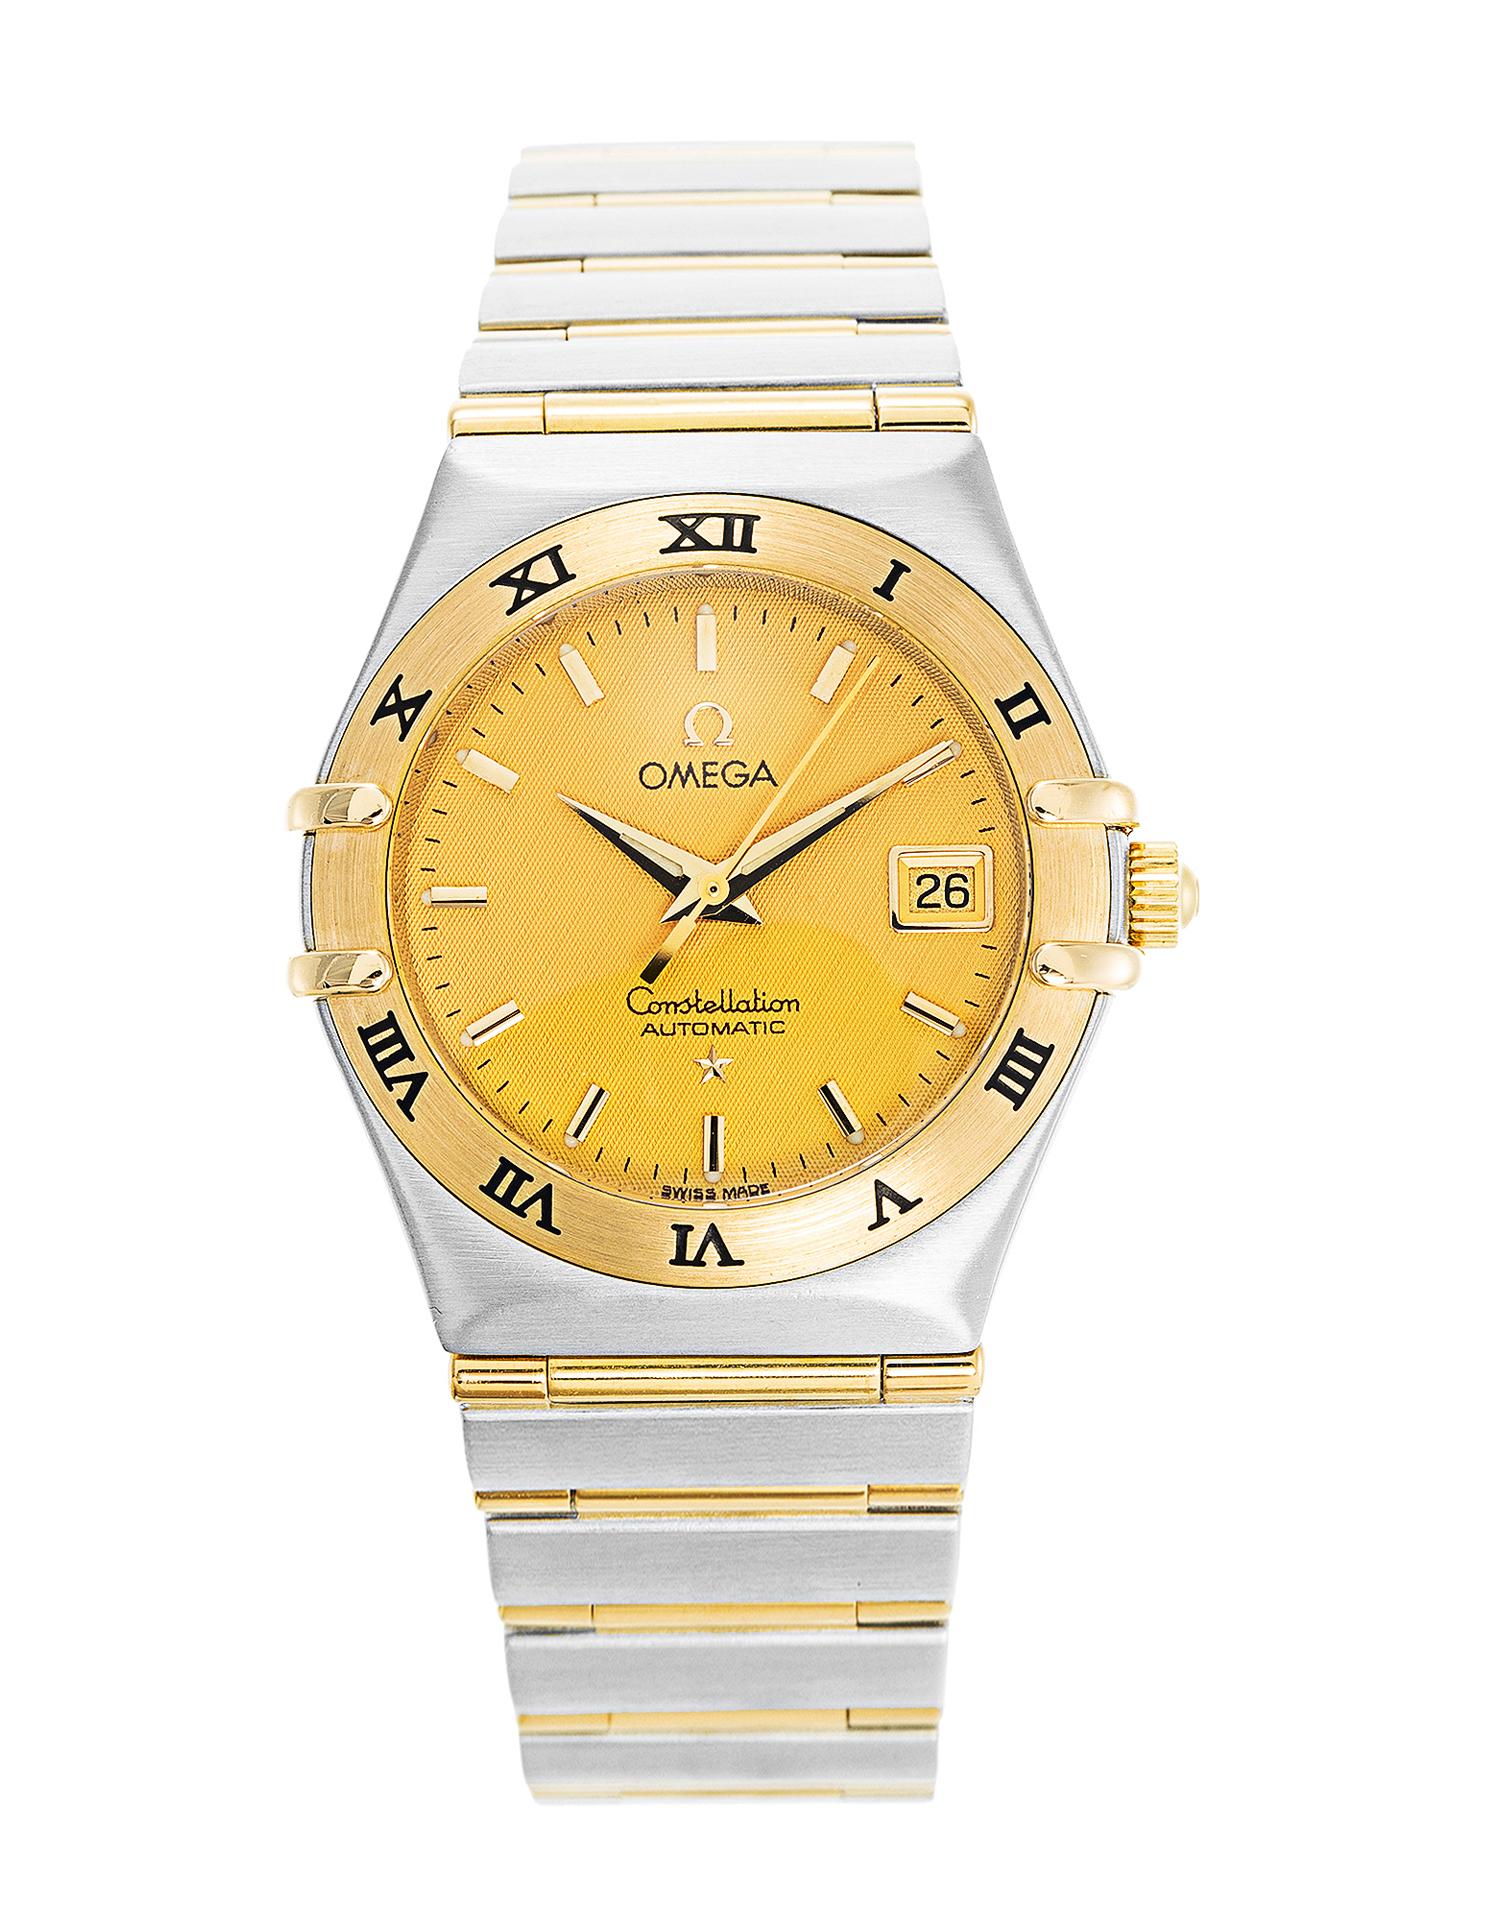 Constellation 95 in 2 Tone on Steel and Yellow Gold Bracelet with Champagne Dial